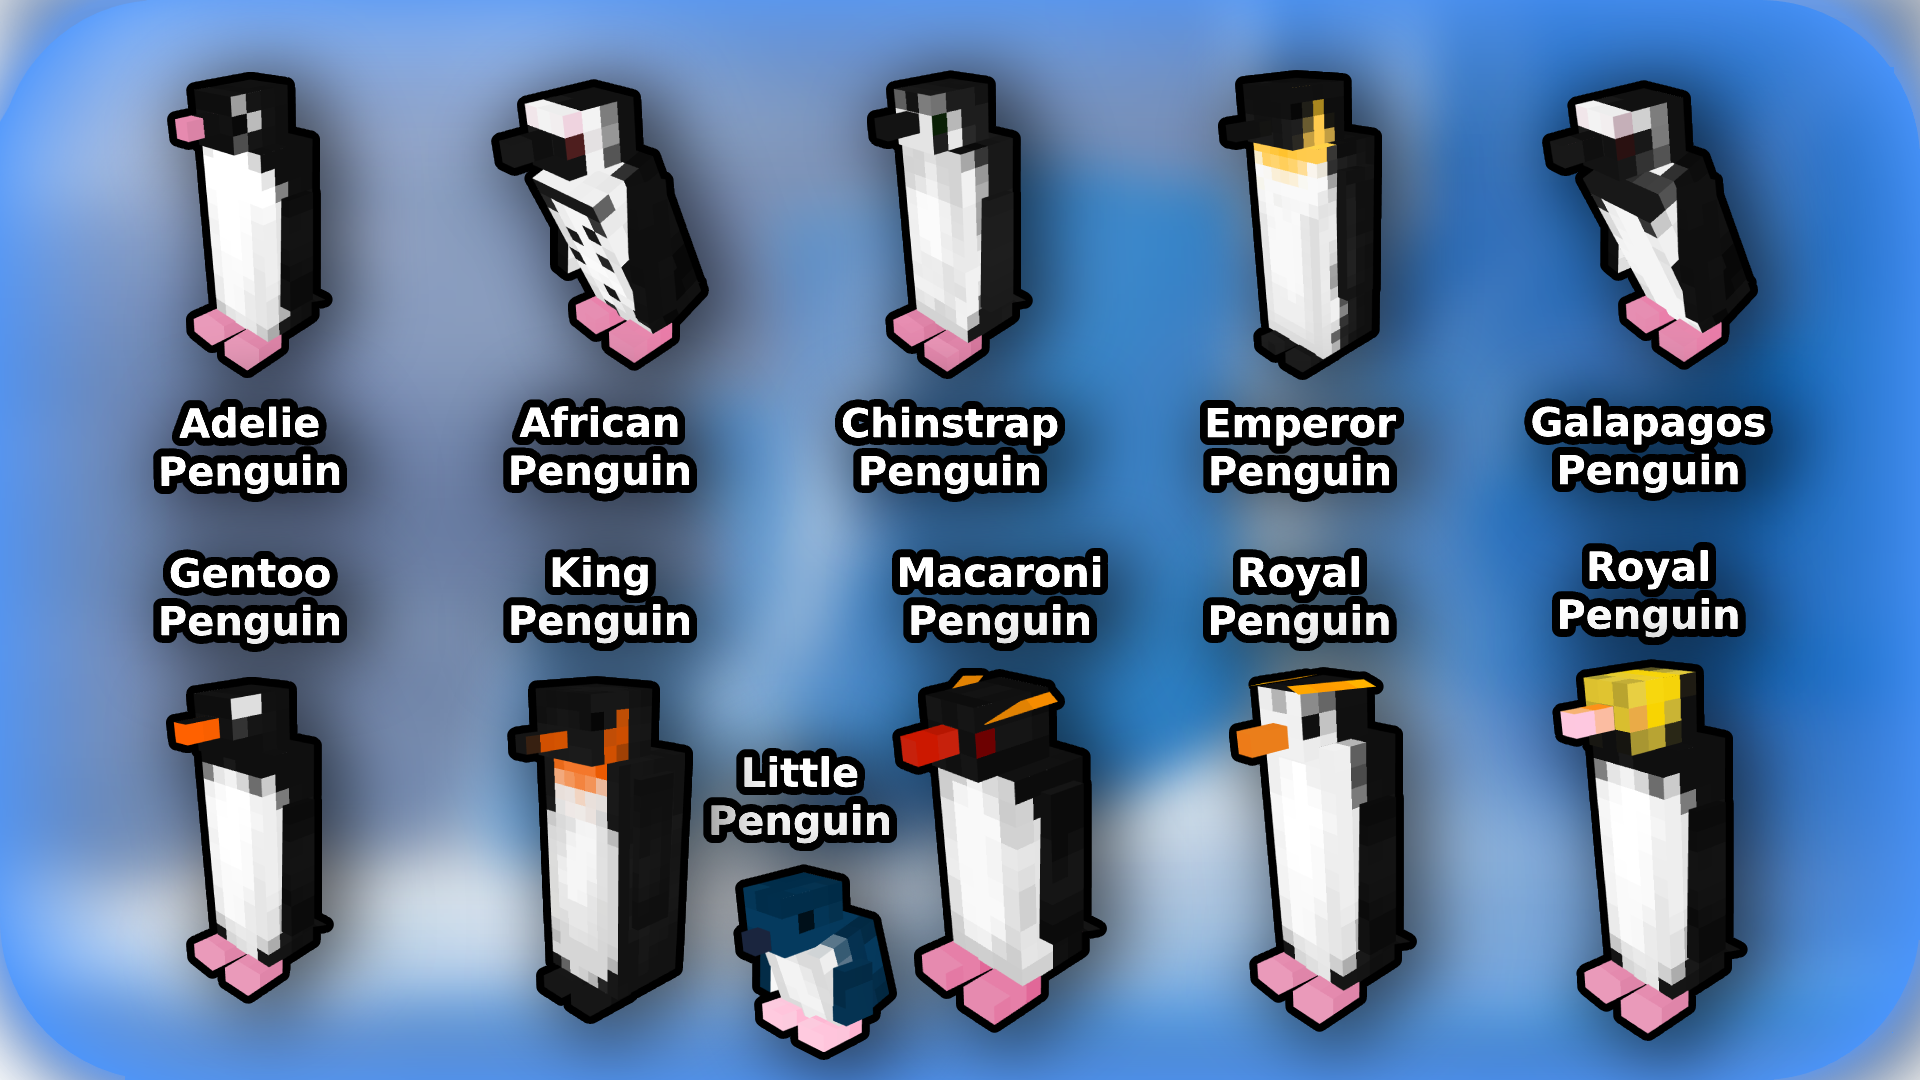 All of the Penguins